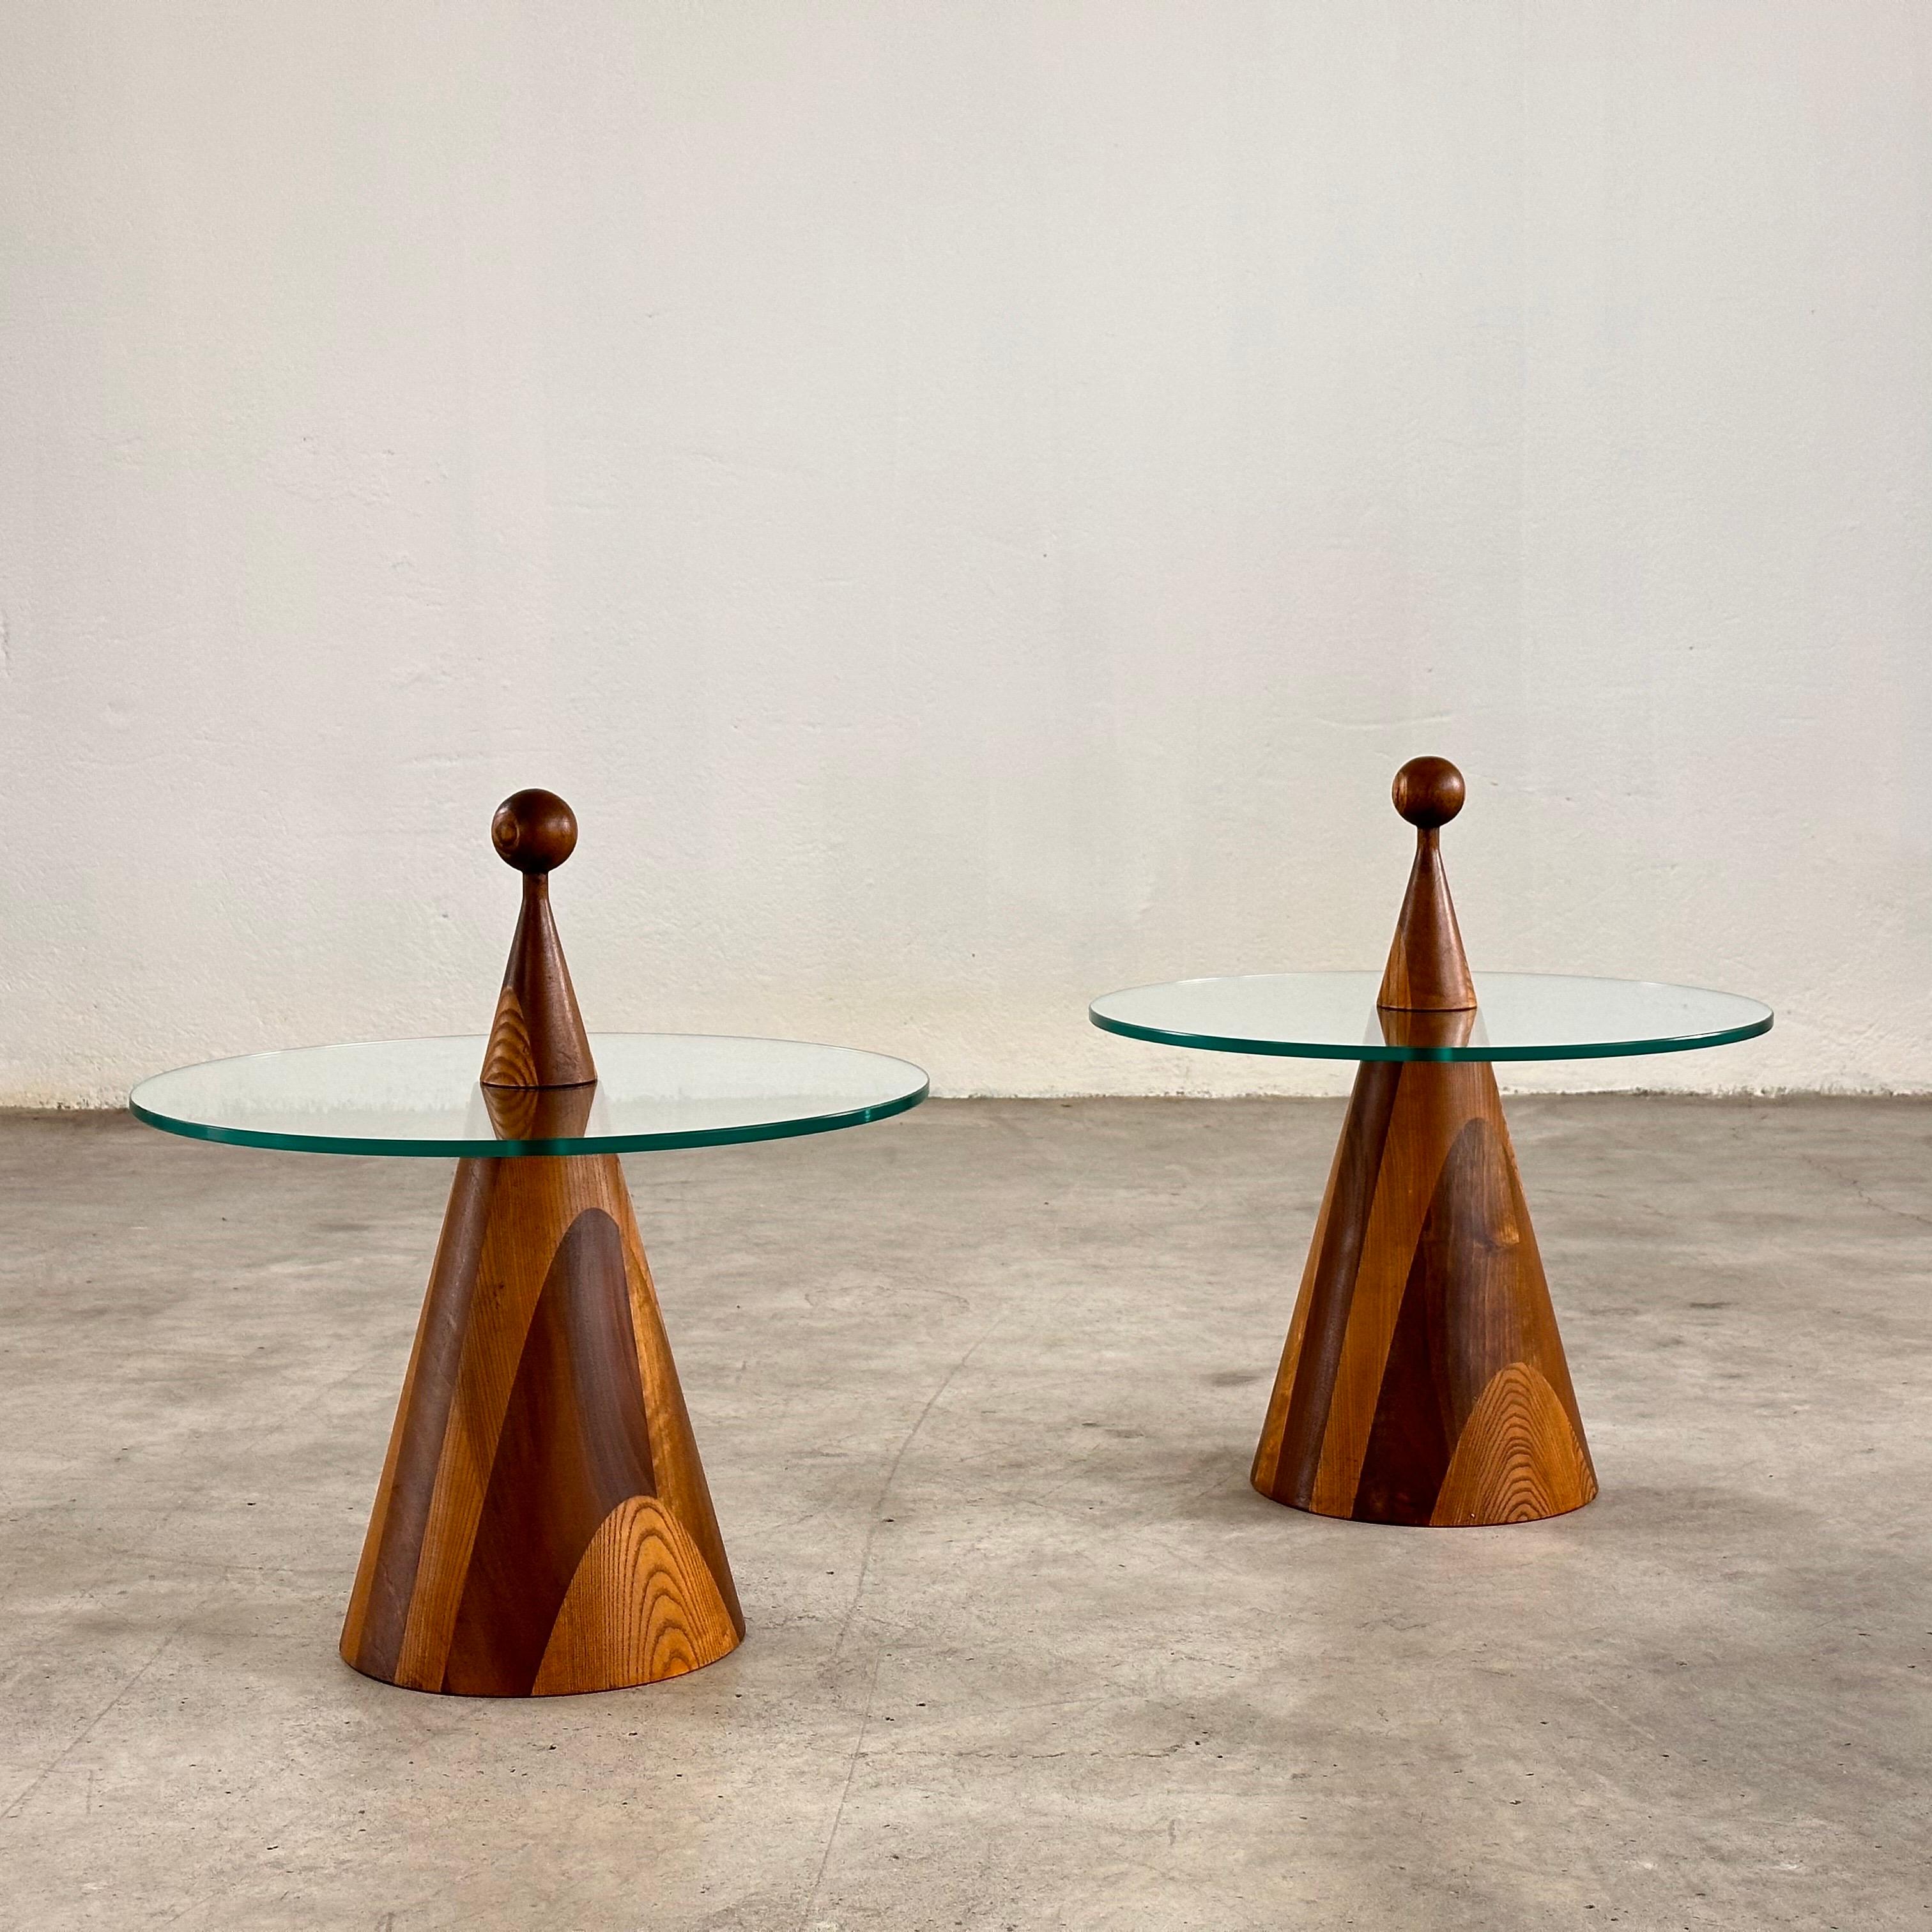 
Elevate your interior decor with these beautiful Ibisco side tables/bedside tables from the 1970s, crafted from walnut wood and glass. These tables feature a distinctive birillo shape, with a round glass top measuring 50 cm in diameter, supported